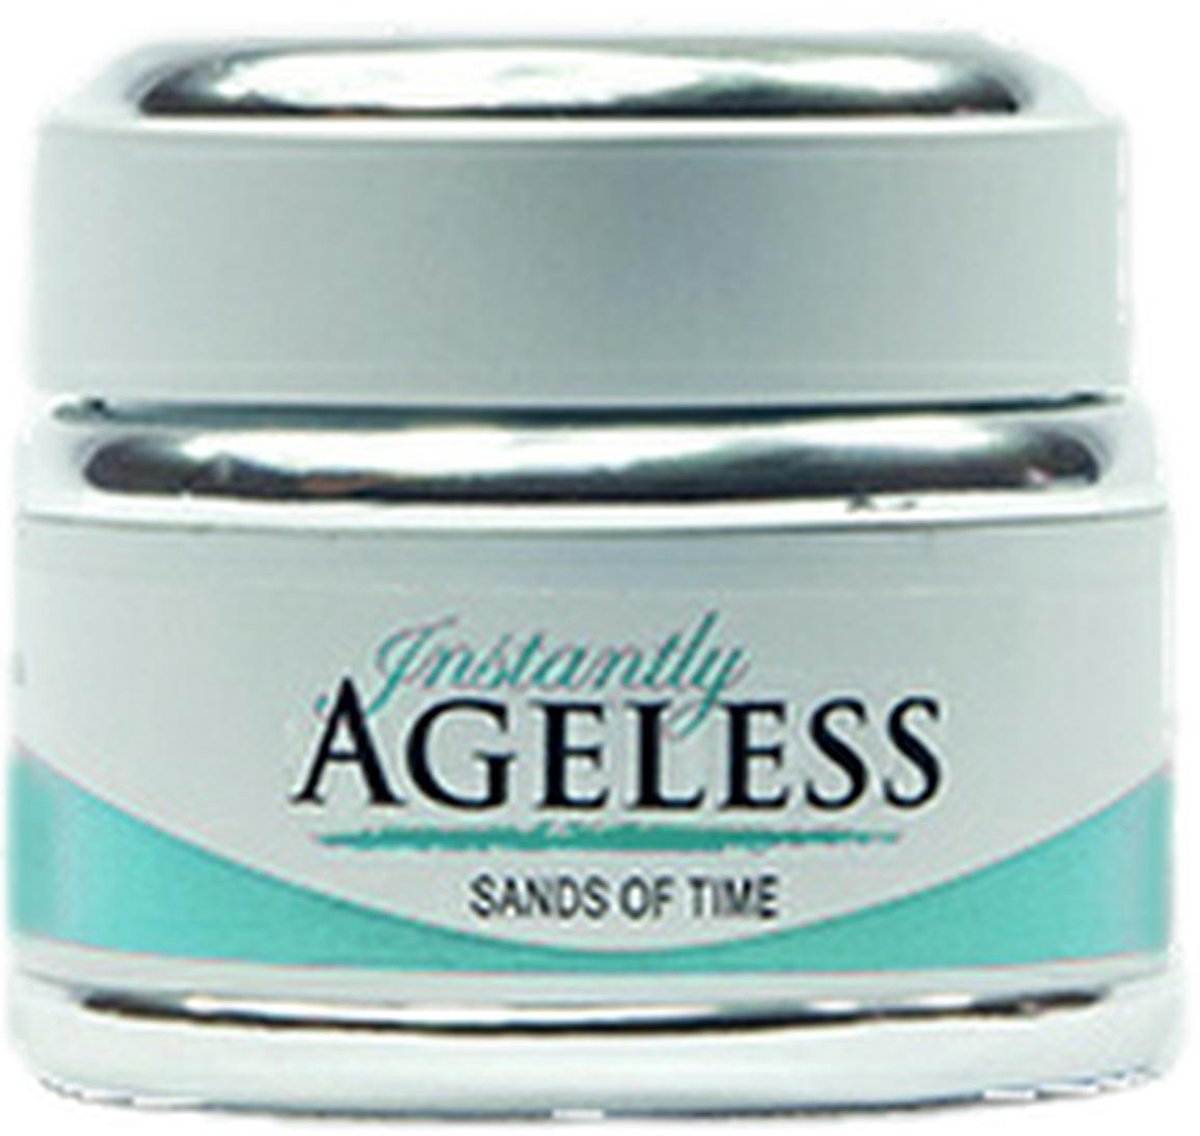 Sands of Time - Microdermabrasie - 50 ml - Instantly Ageless